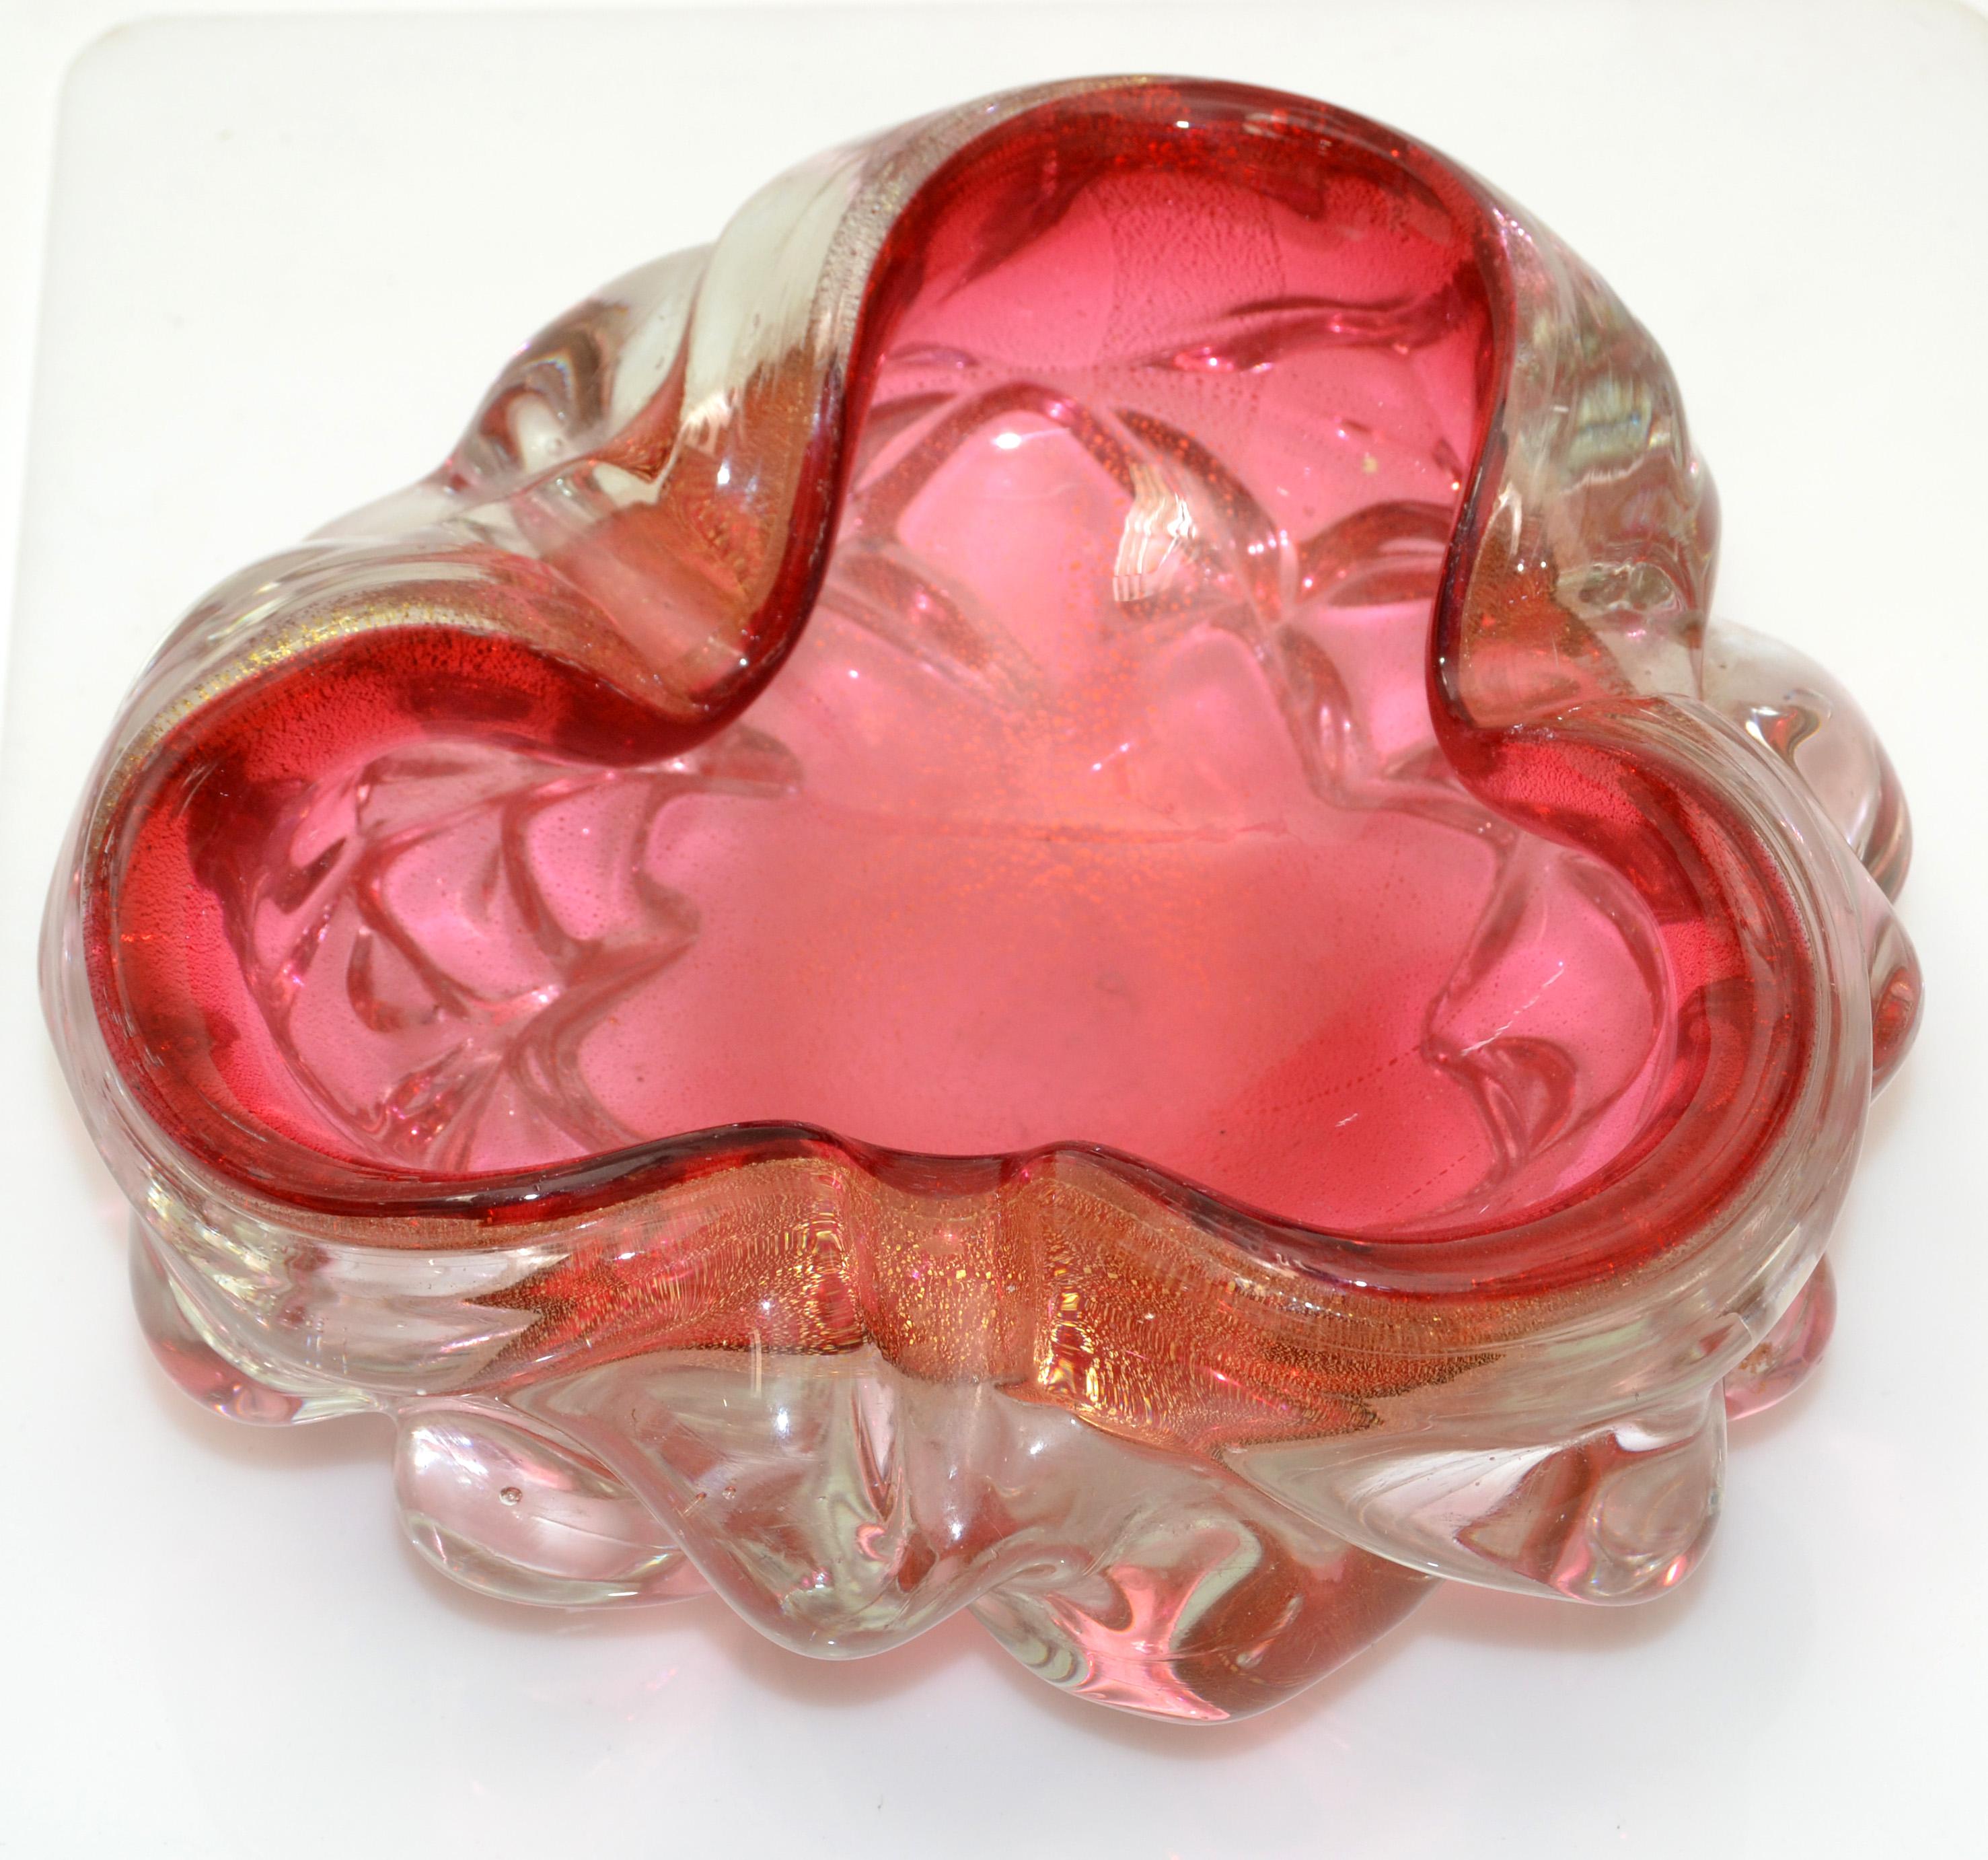 Murano blown art glass Bowl, Catchall or Vide-Poche in raspberry Glass and Clear Gold dusted glass made in Italy.
Mid-Century Modern triple cased unique glass art very elegant and practical.
This is a large and heavy Centerpiece.